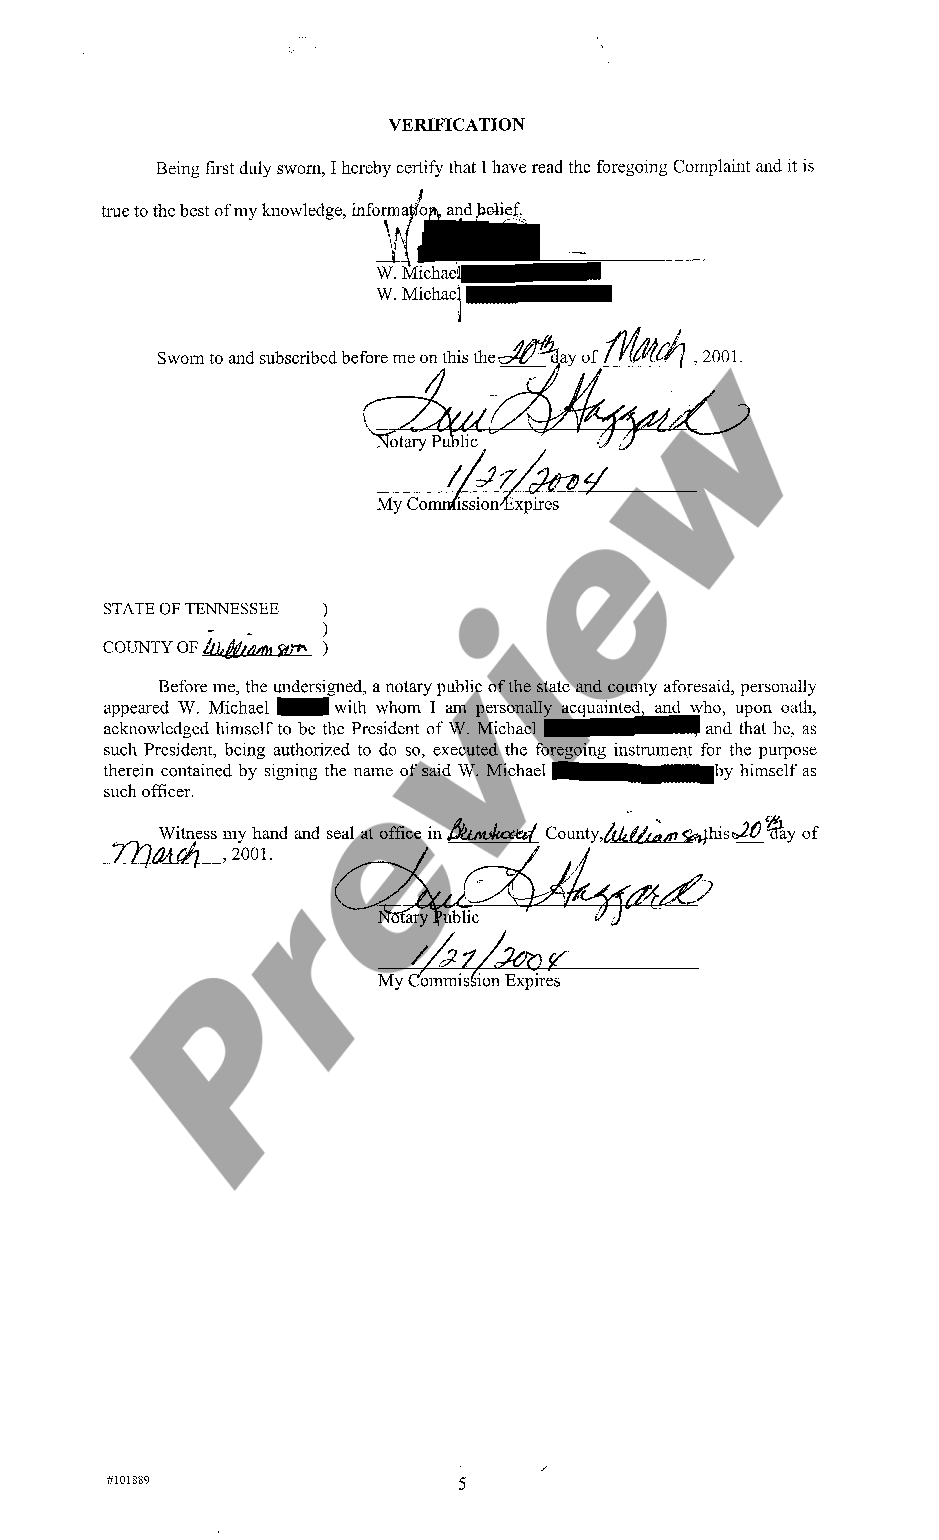 verified-complaint-in-tennessee-form-for-annulment-us-legal-forms